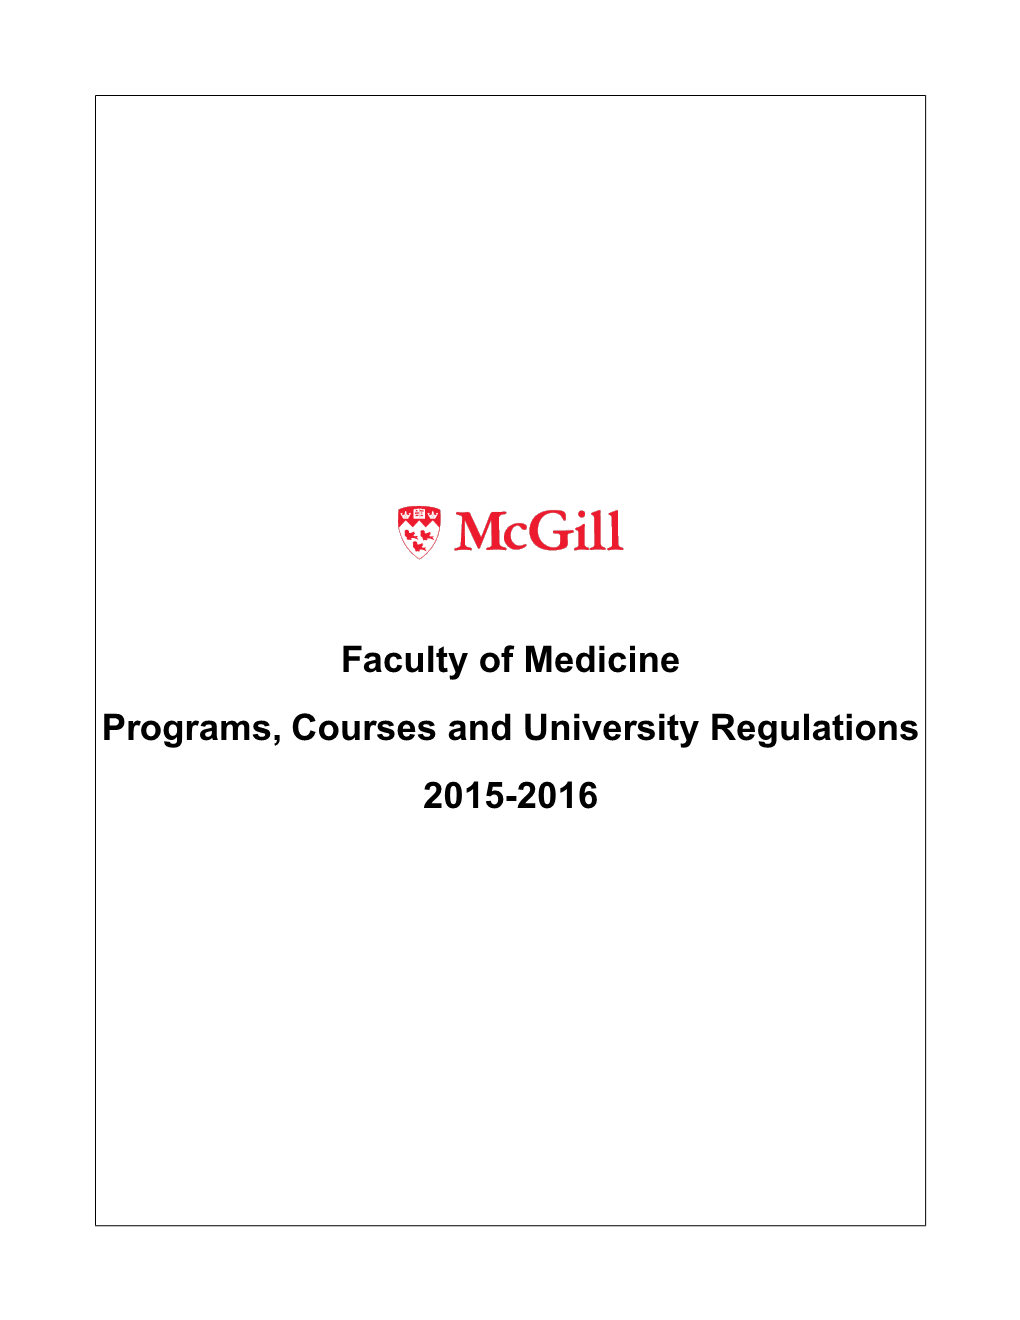 Faculty of Medicine Programs, Courses and University Regulations 2015-2016